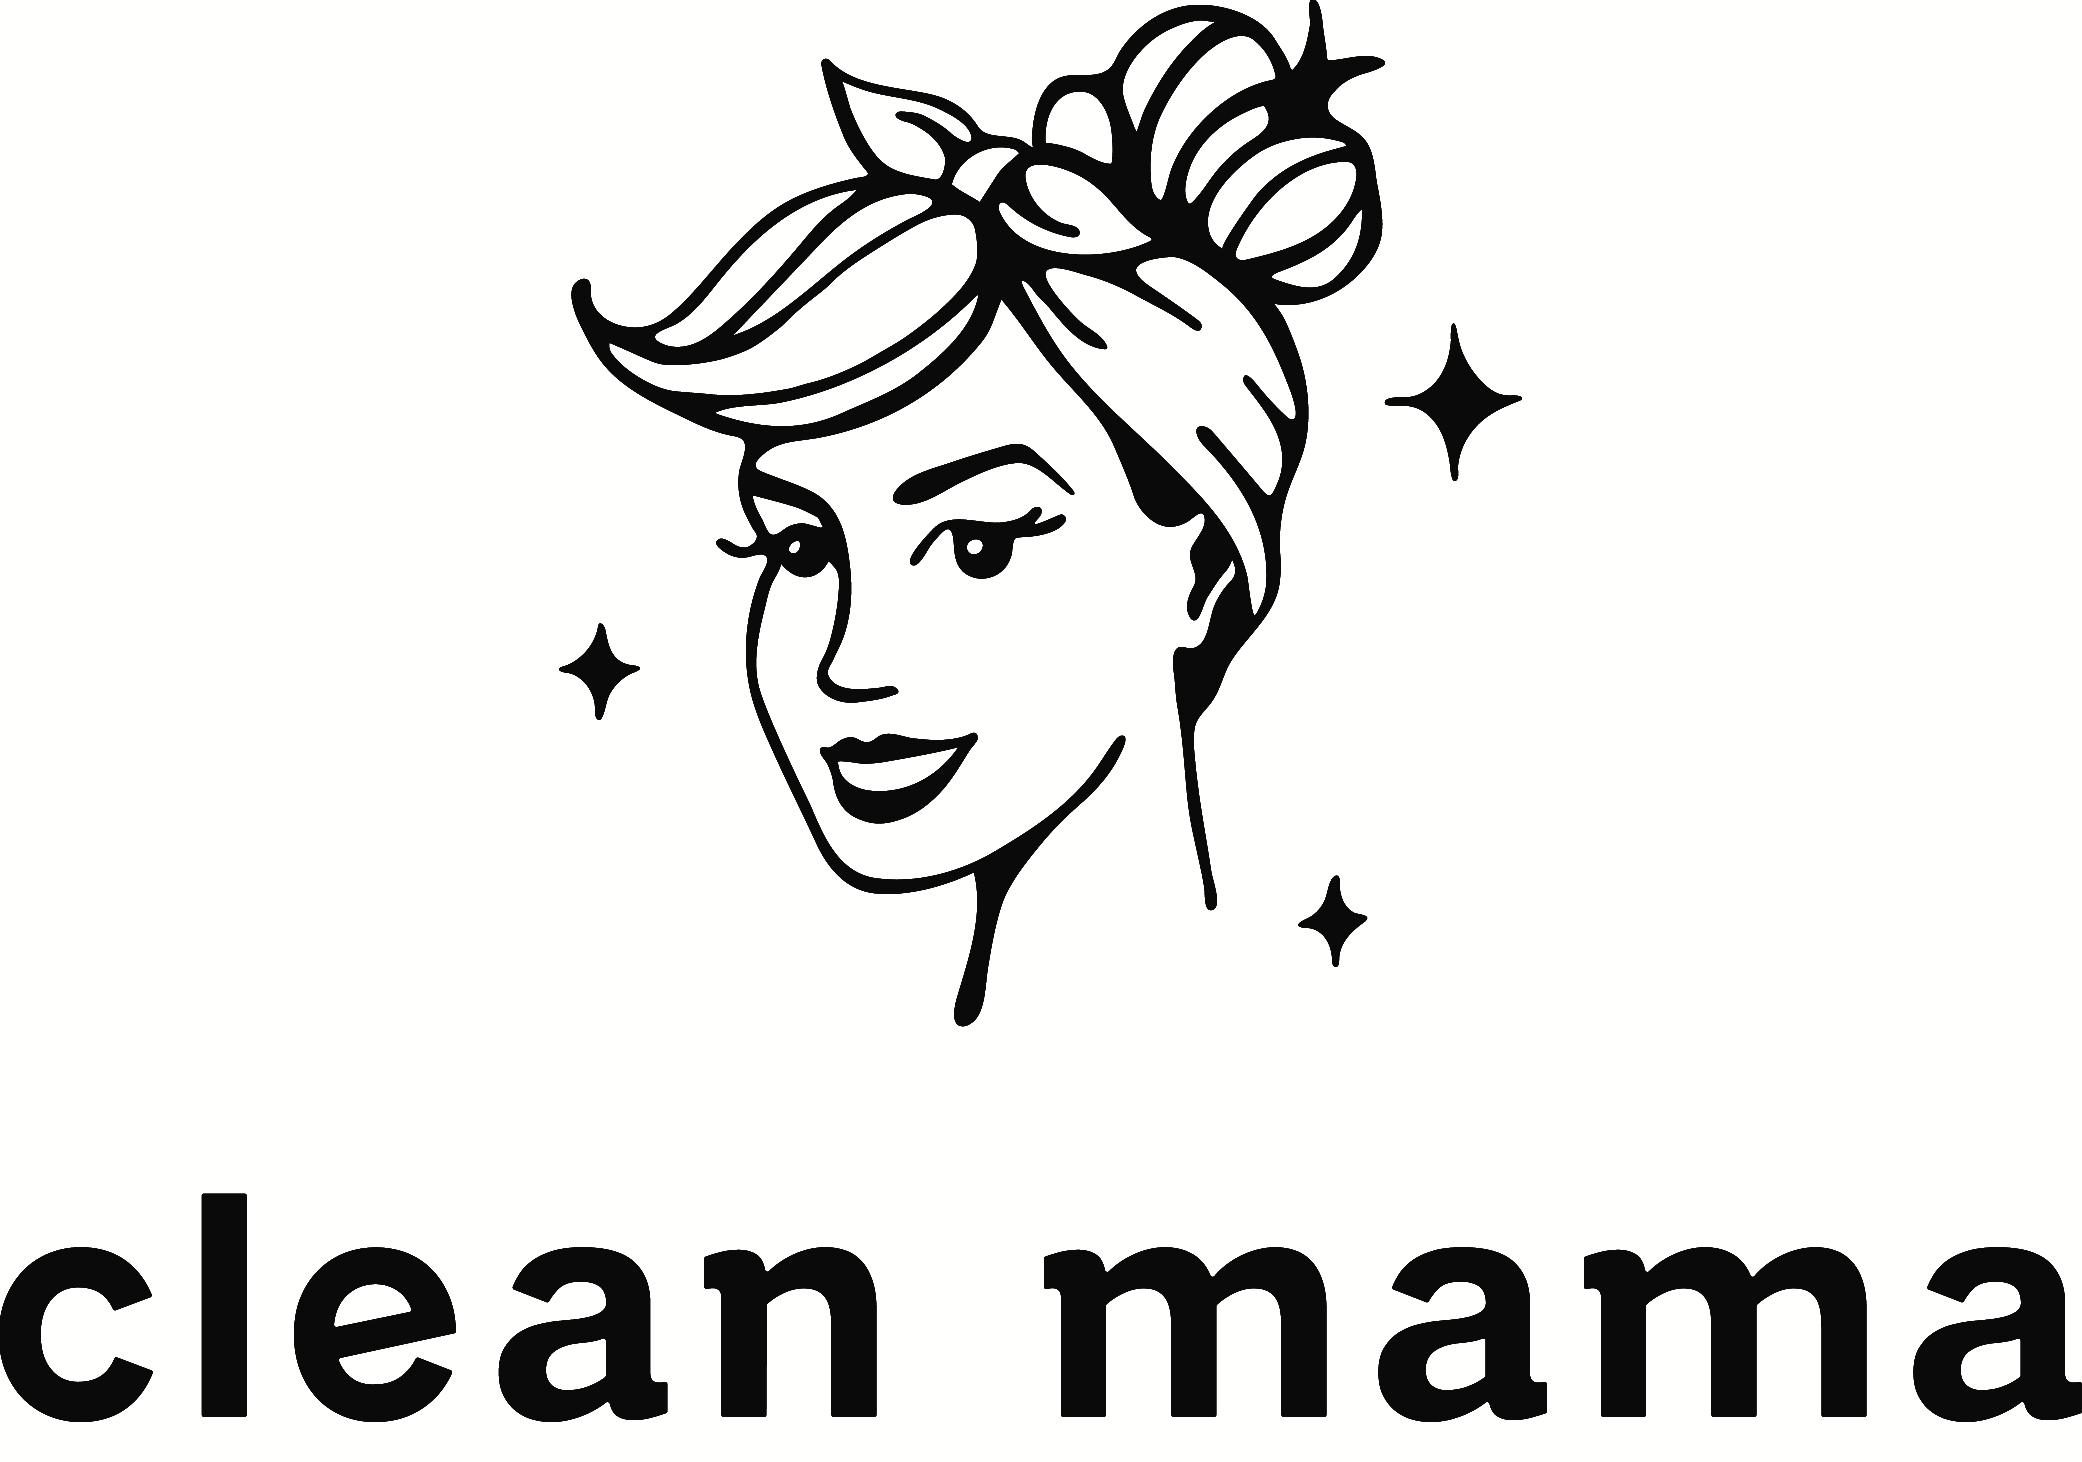 https://www.leapingbunny.org/sites/default/files/2021-03/CLEAN%20MAMA%20LOGO_0.png